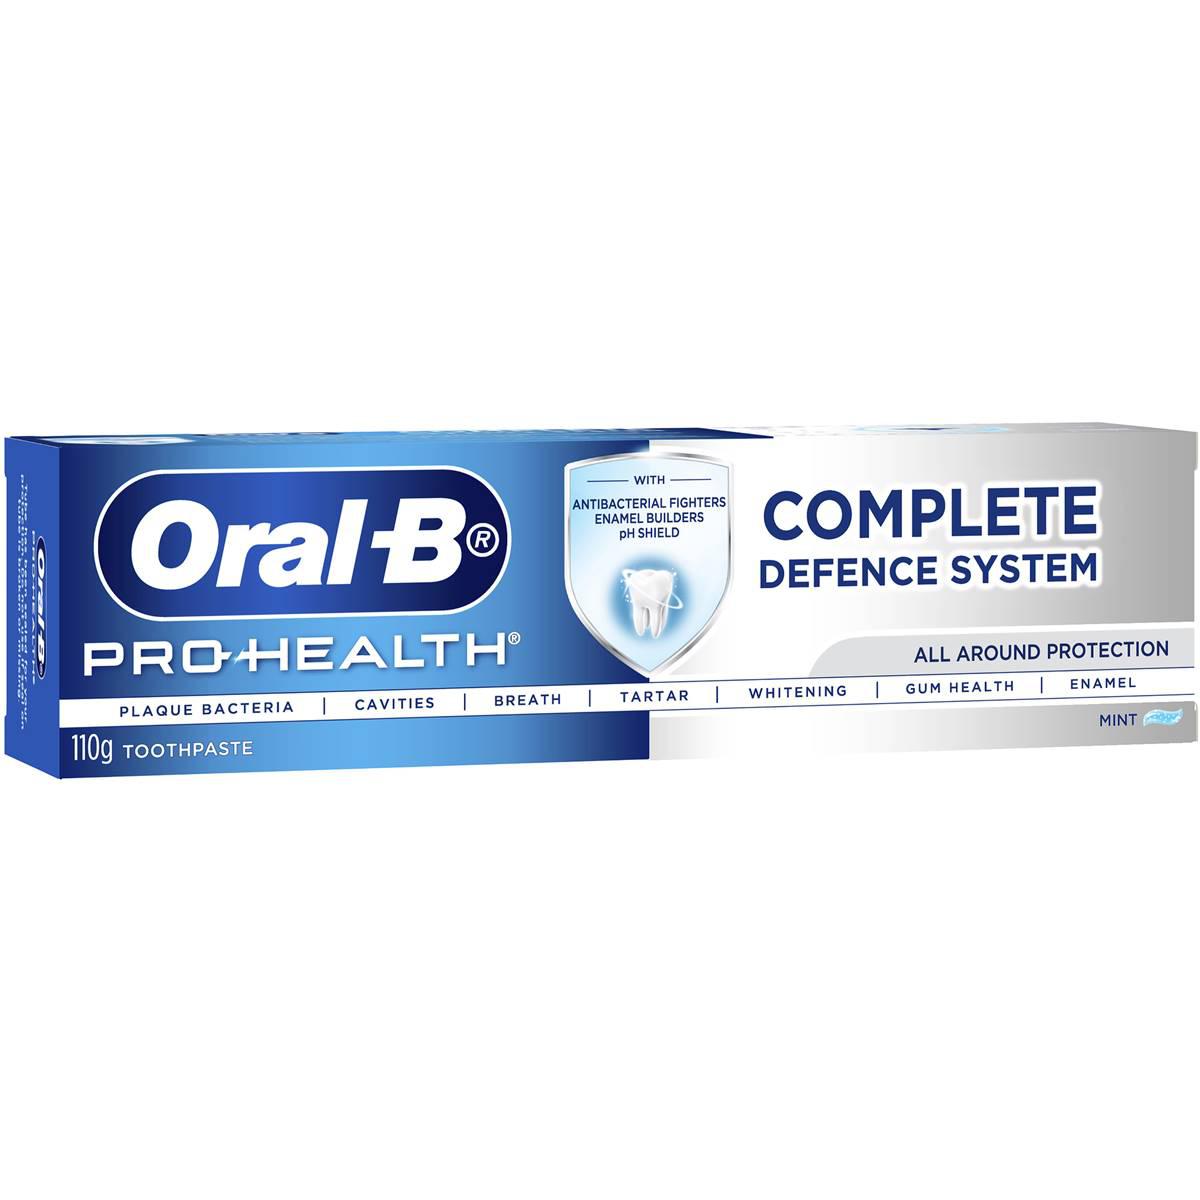 Oral B Pro-health Advanced All Around Protection Toothpaste 110g